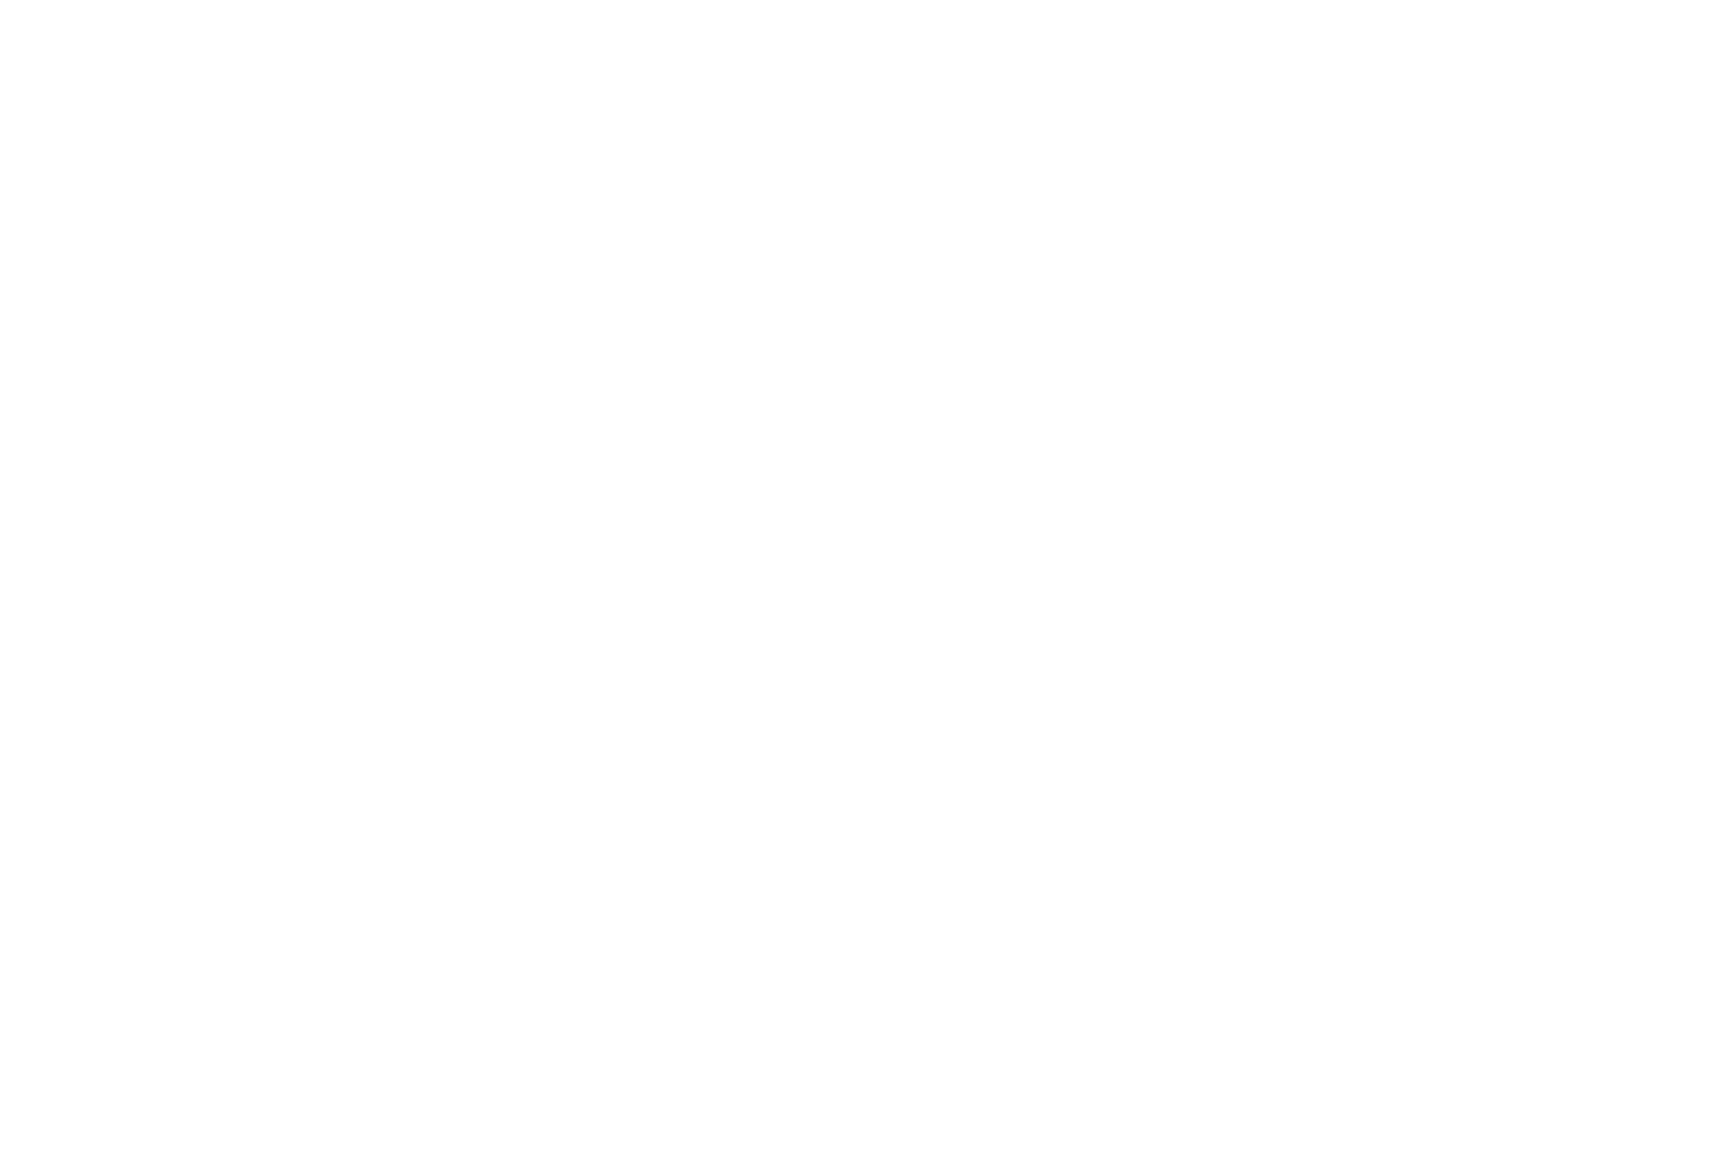 OFFICIAL SELECTION - GROVE FILM FESTIVAL  - 2016 (1).png